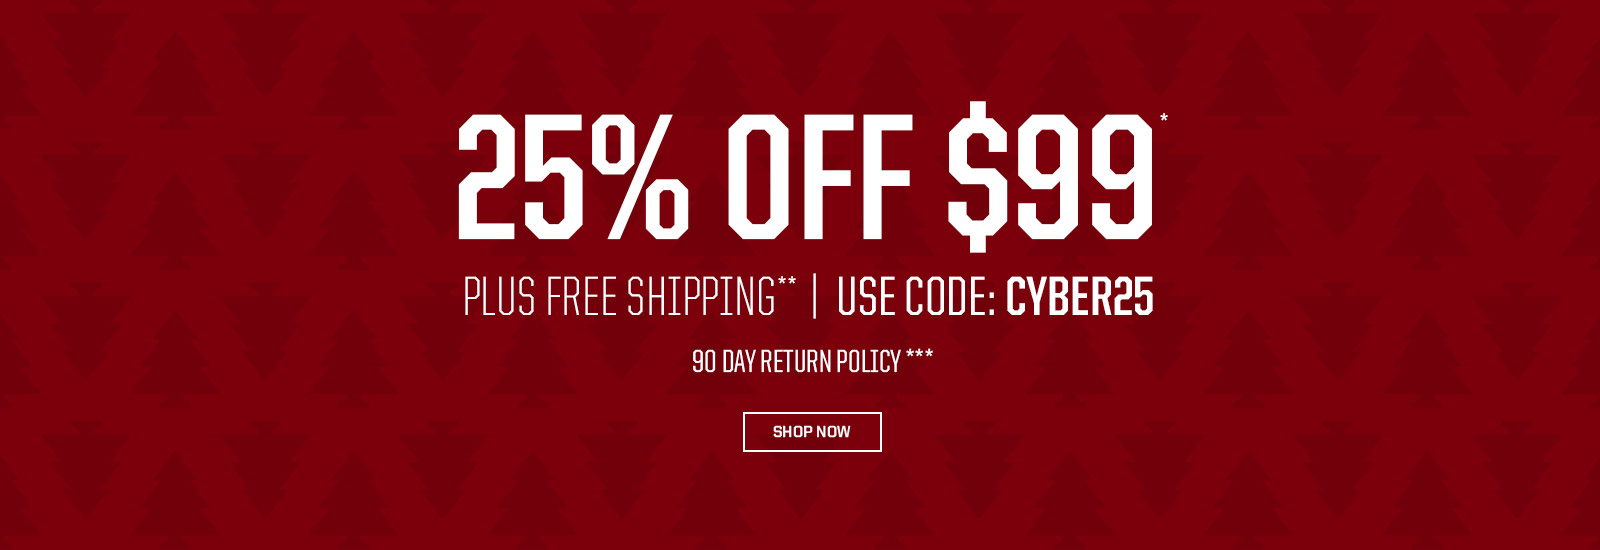 Eastbay Cyber Monday Sale